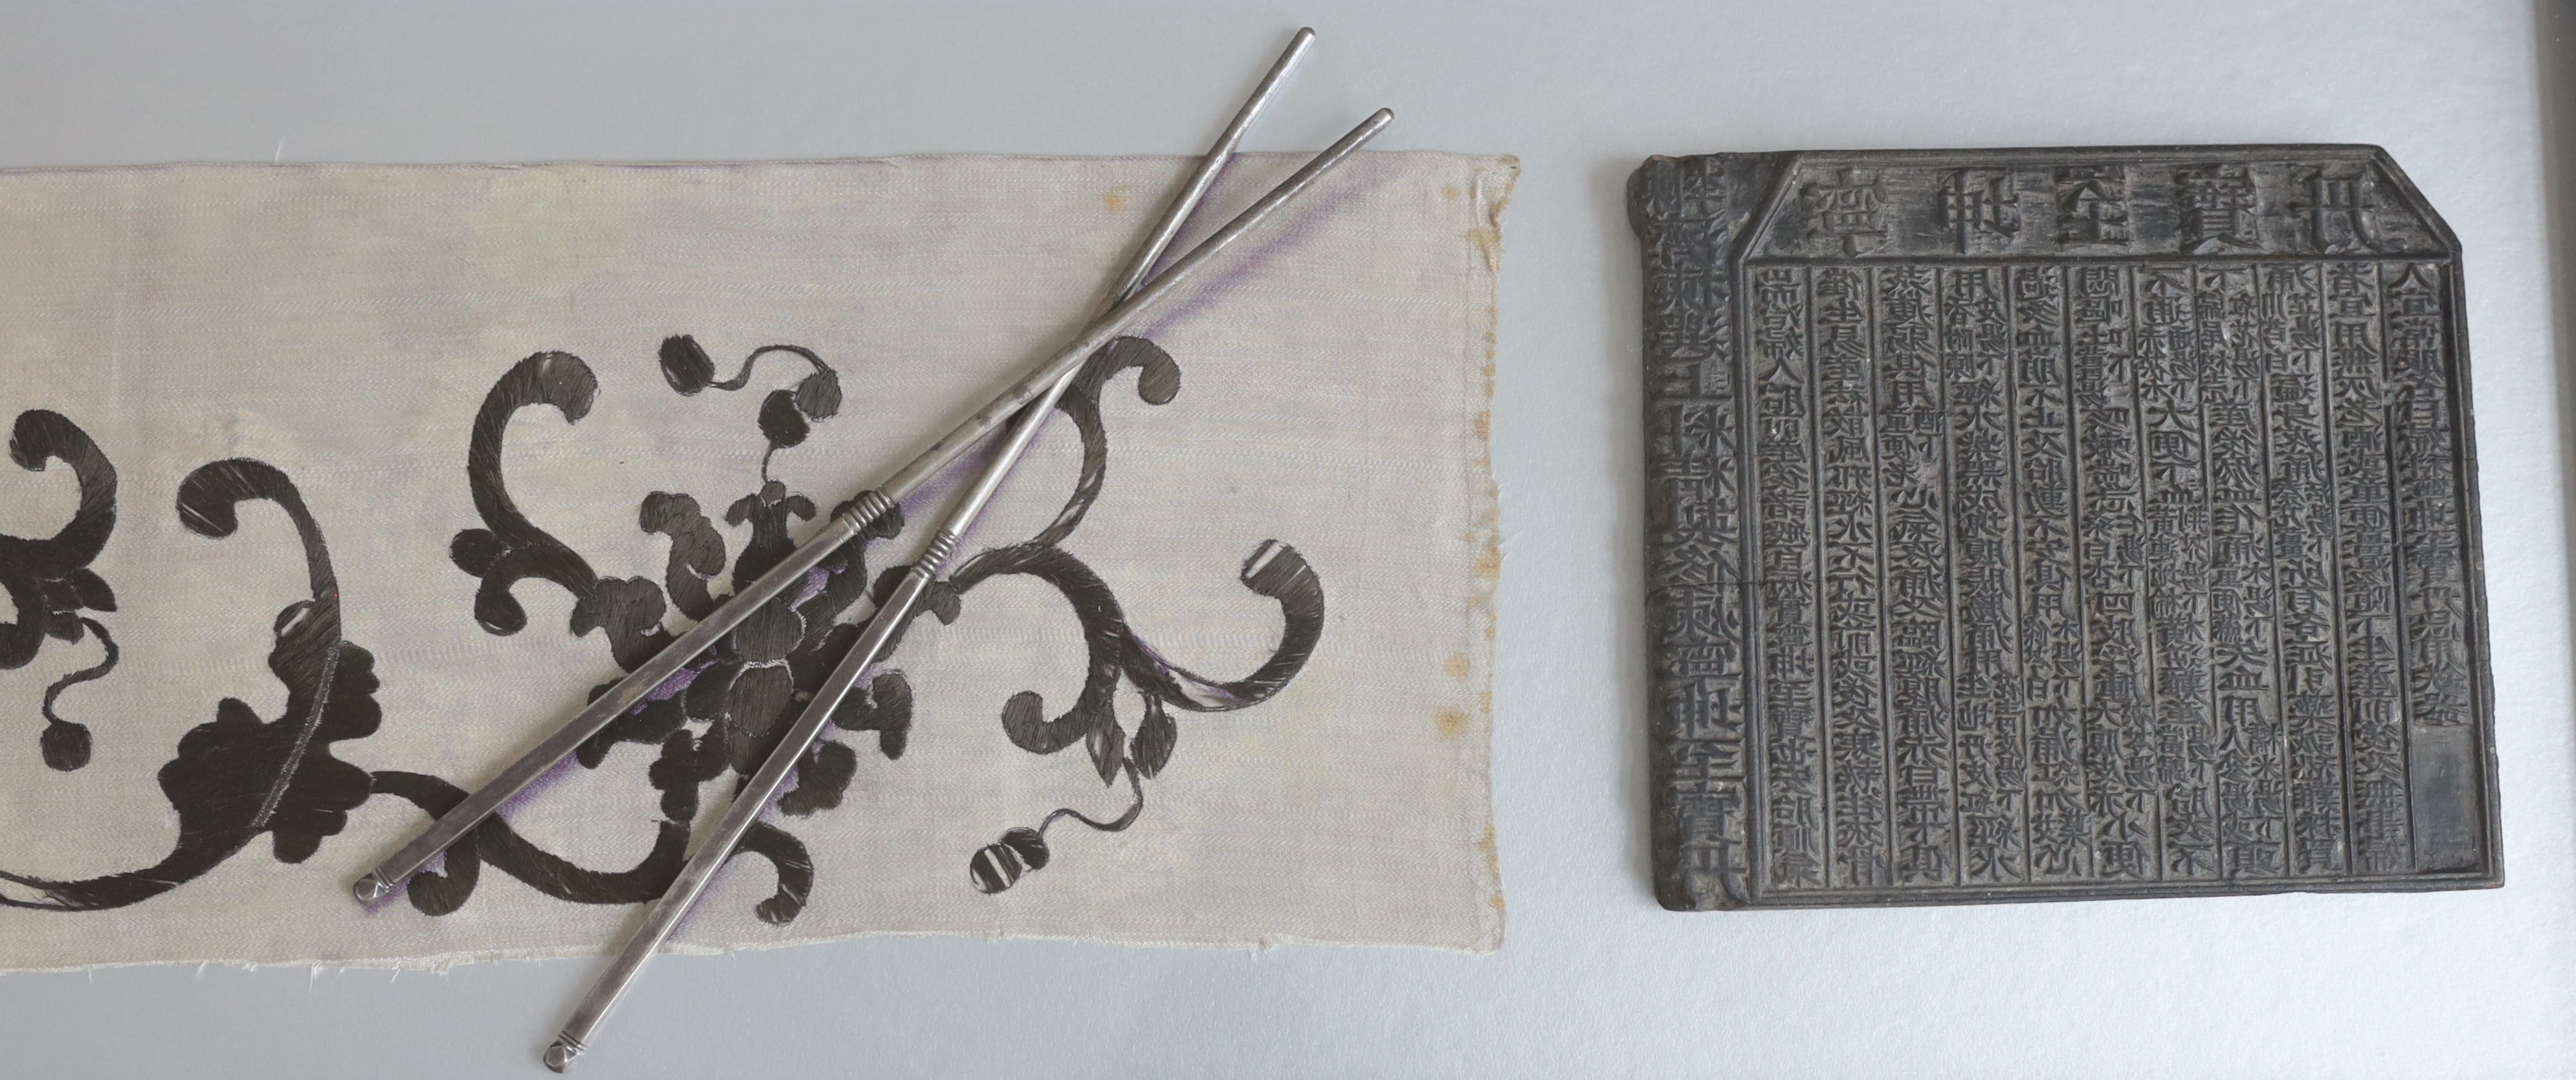 A late 19th century Chinese black and cream silk embroidery, mounted together with an inscribed calligraphic stone, a pair of white metal chop sticks and a similar dish, embroidery: 5.5cm wide, 105cm long